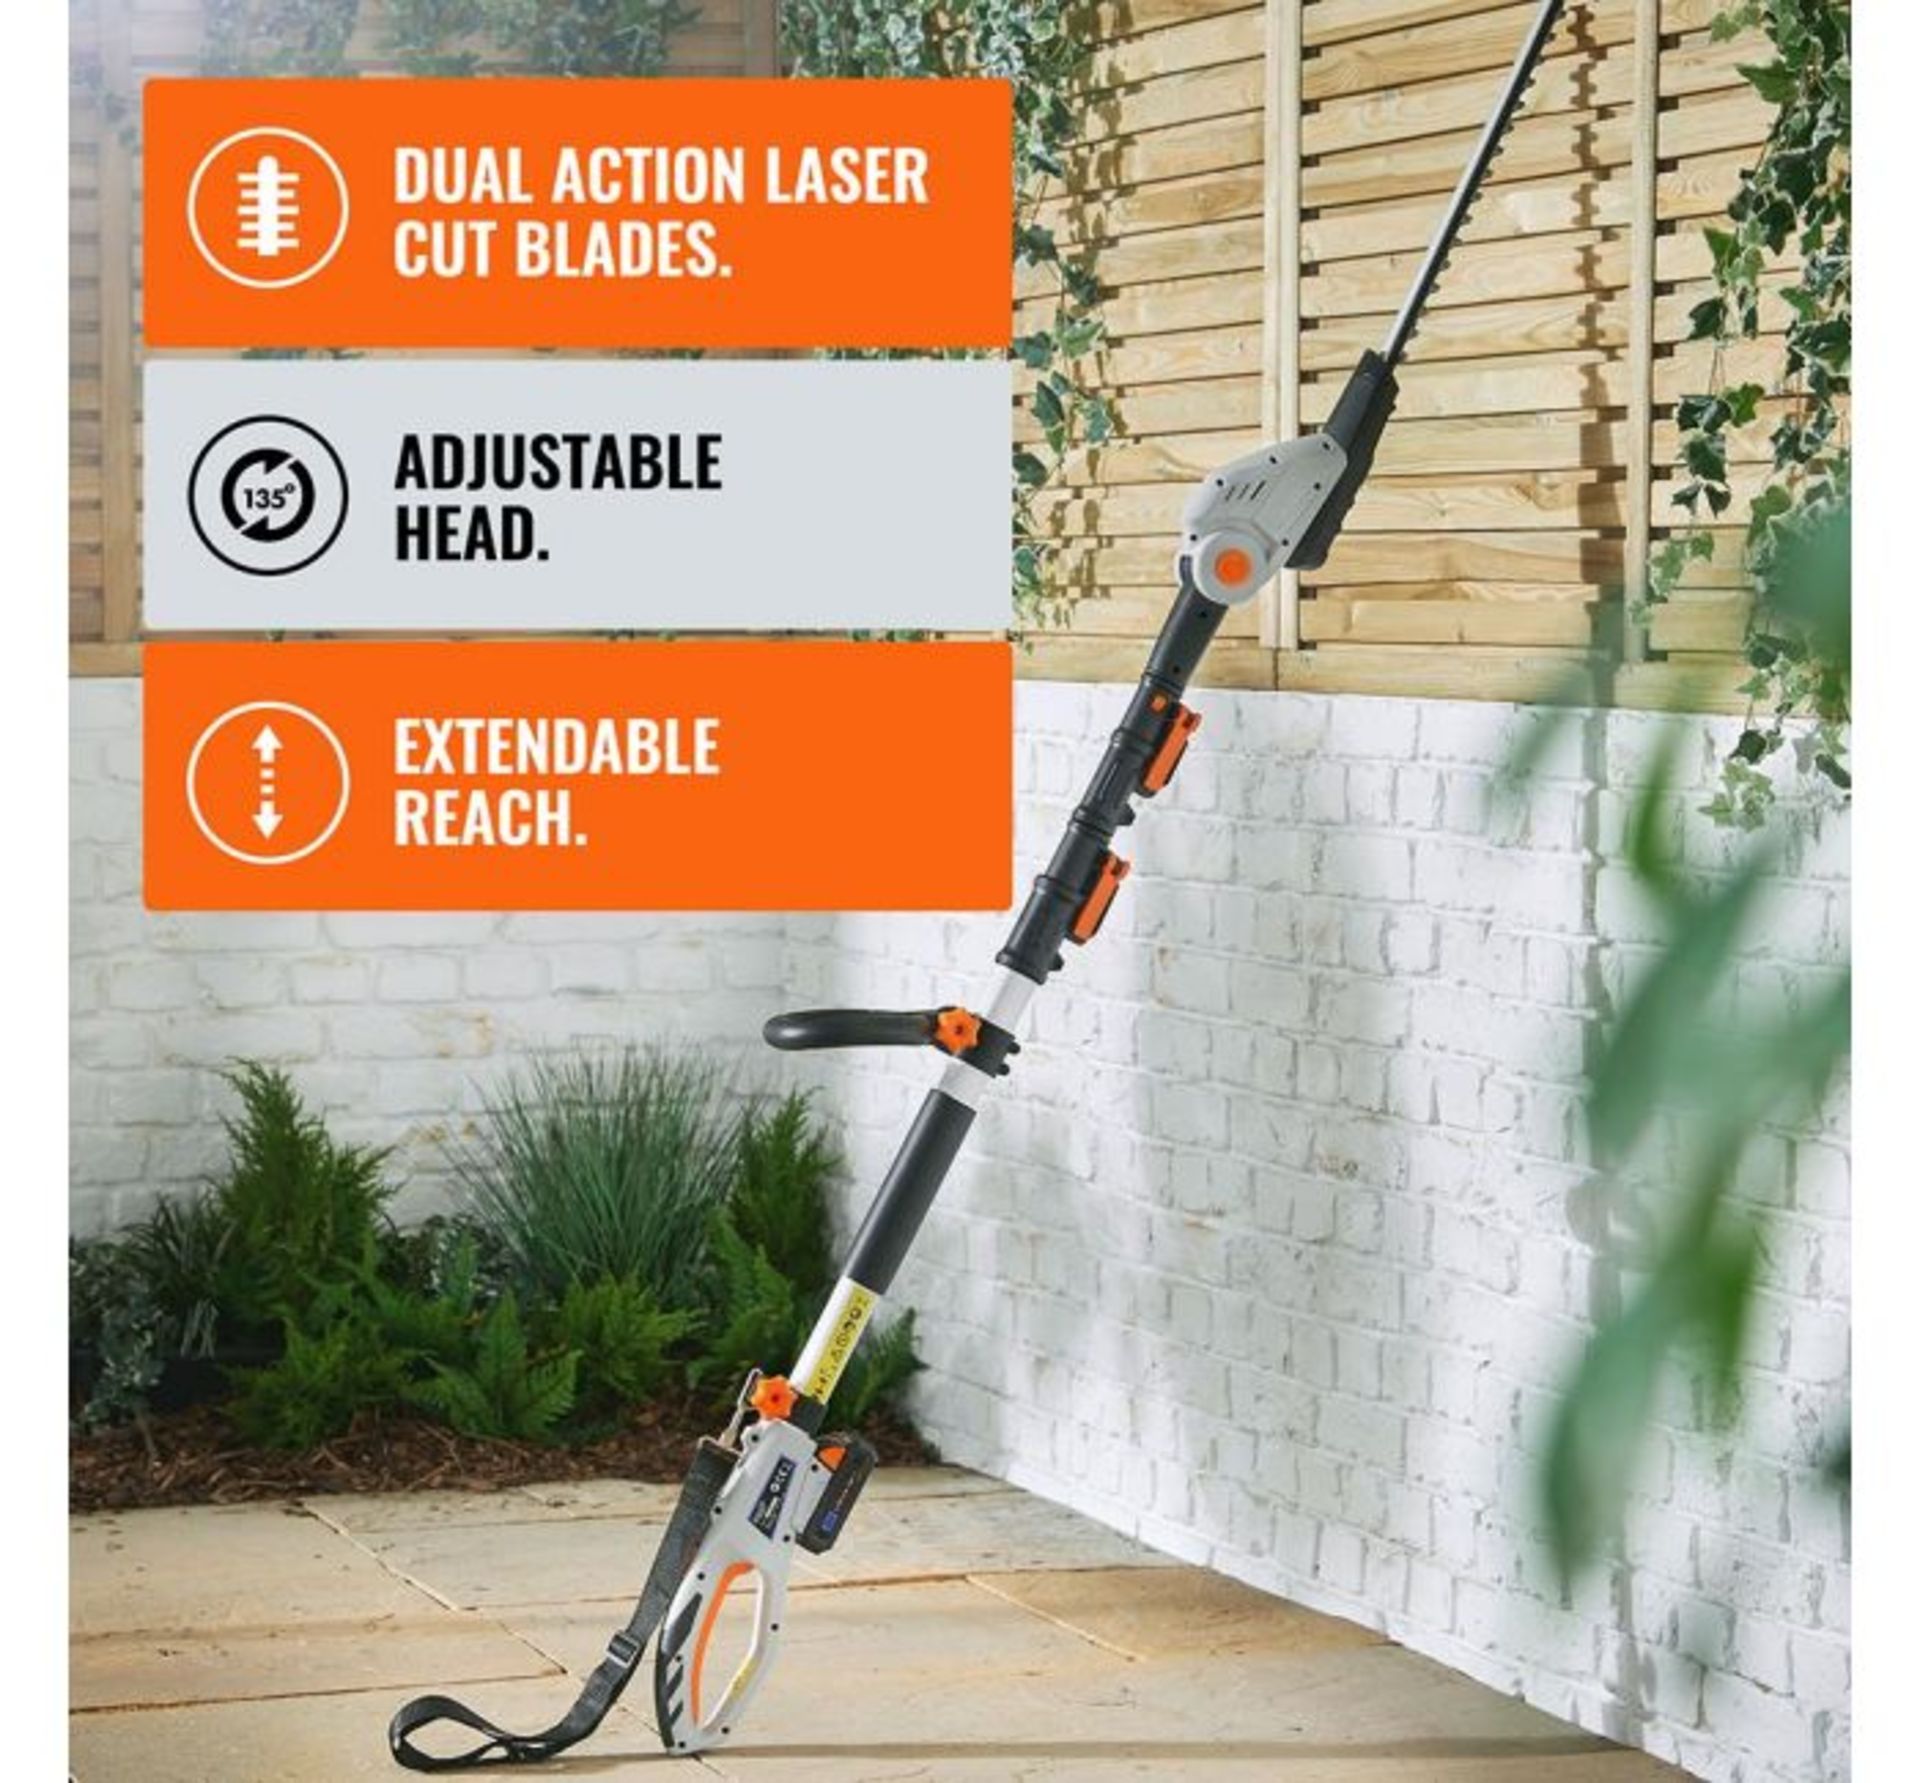 (GL17) 20V Max. Cordless Pole Hedge Trimmer 45cm dual-action laser cut blades operate a fast c... - Image 3 of 3